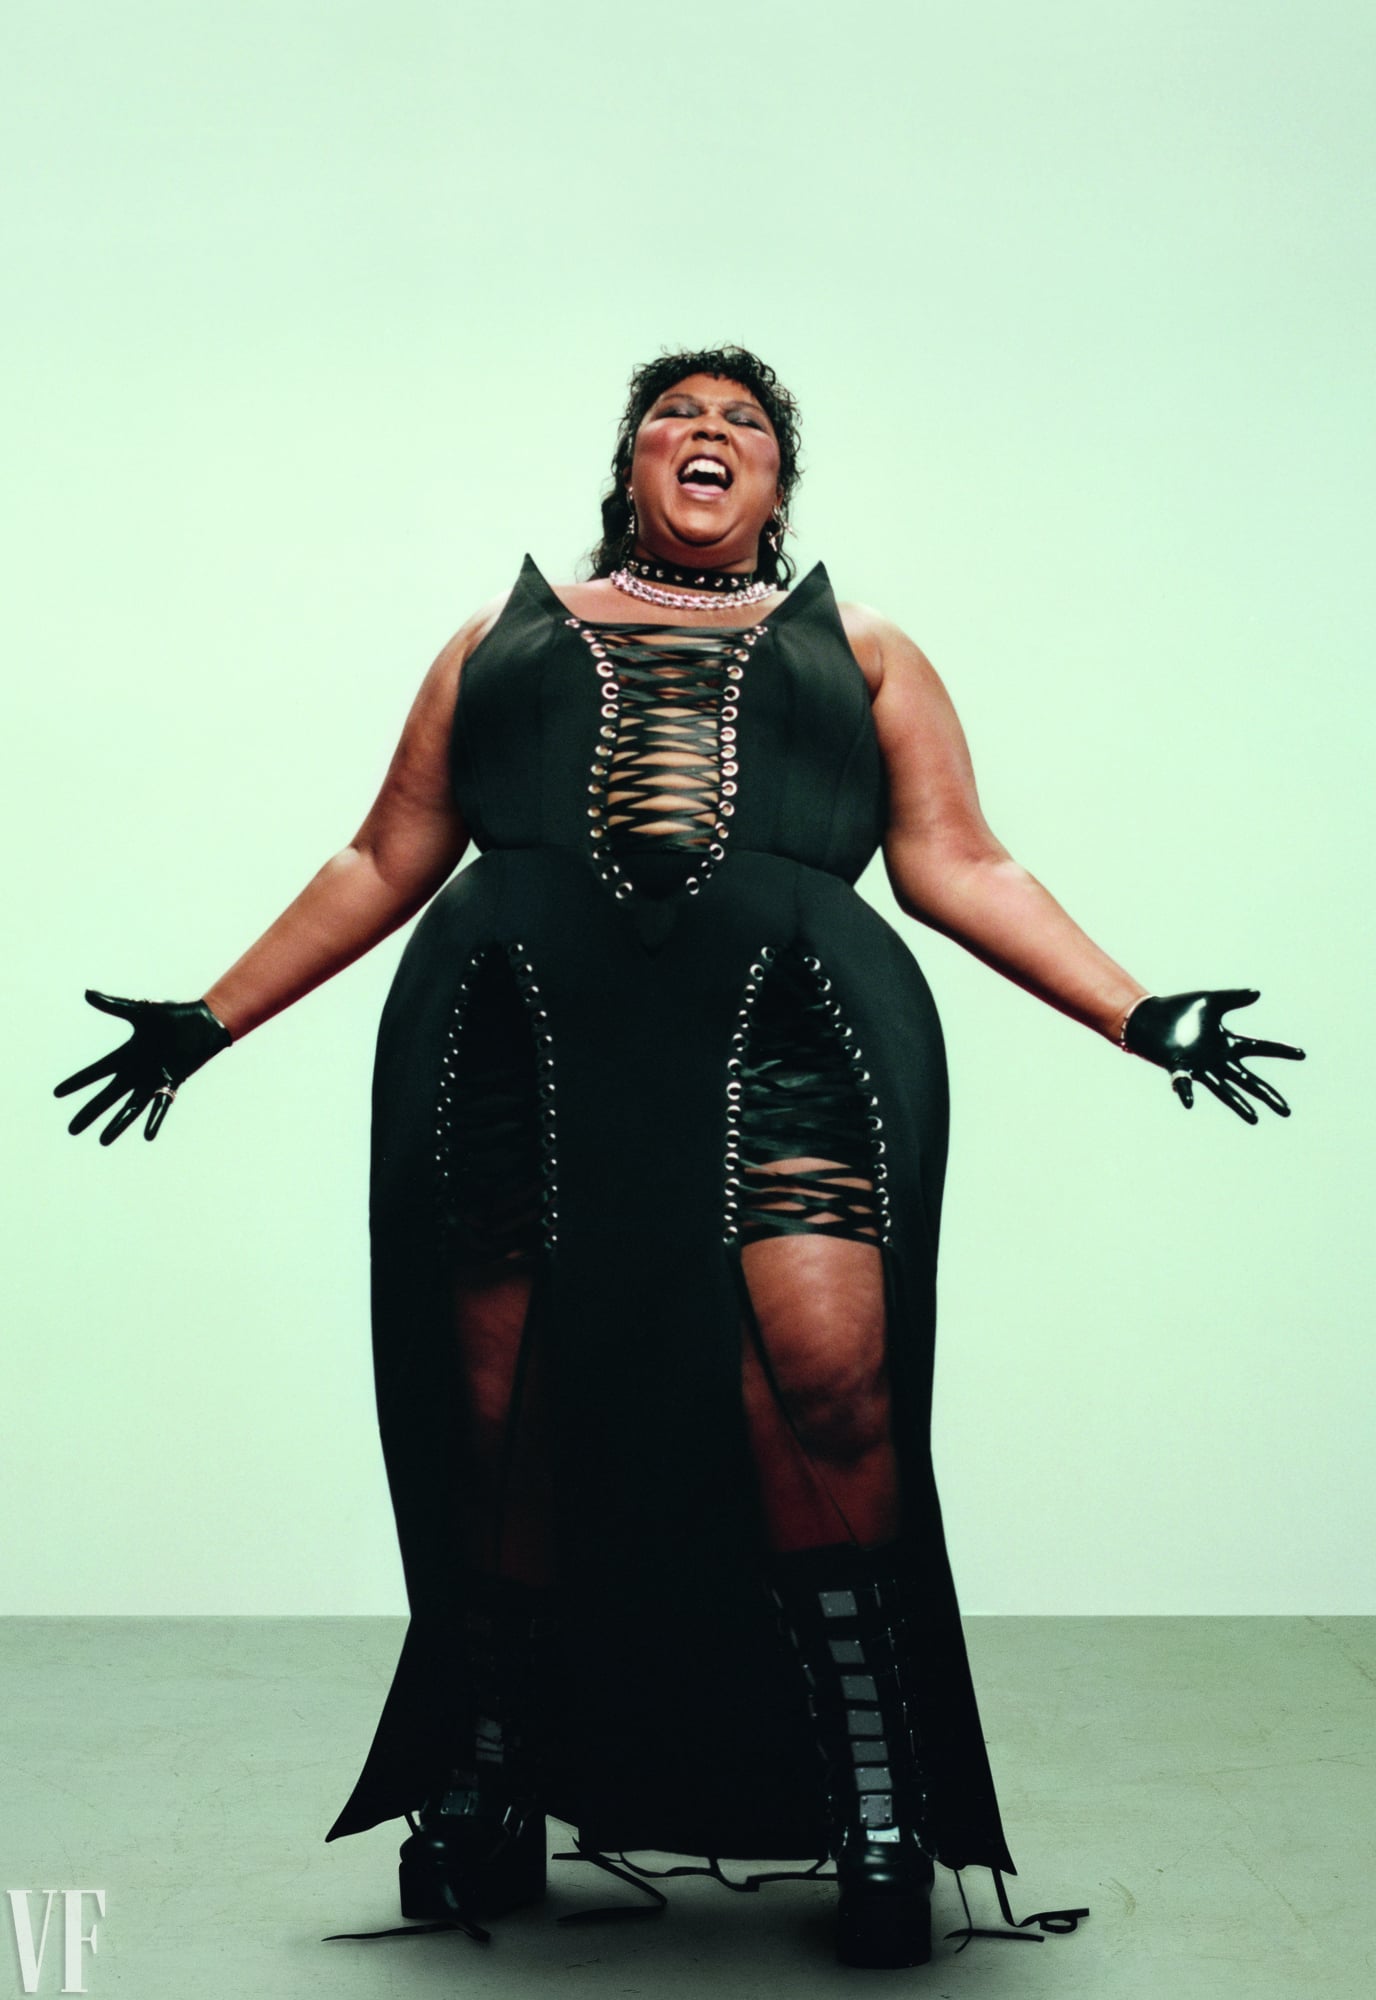 Lizzo photographed for Vanity Fair by Cambell Addy. Stylist Patti Wilson. Photo Editor Natalie Gialluca